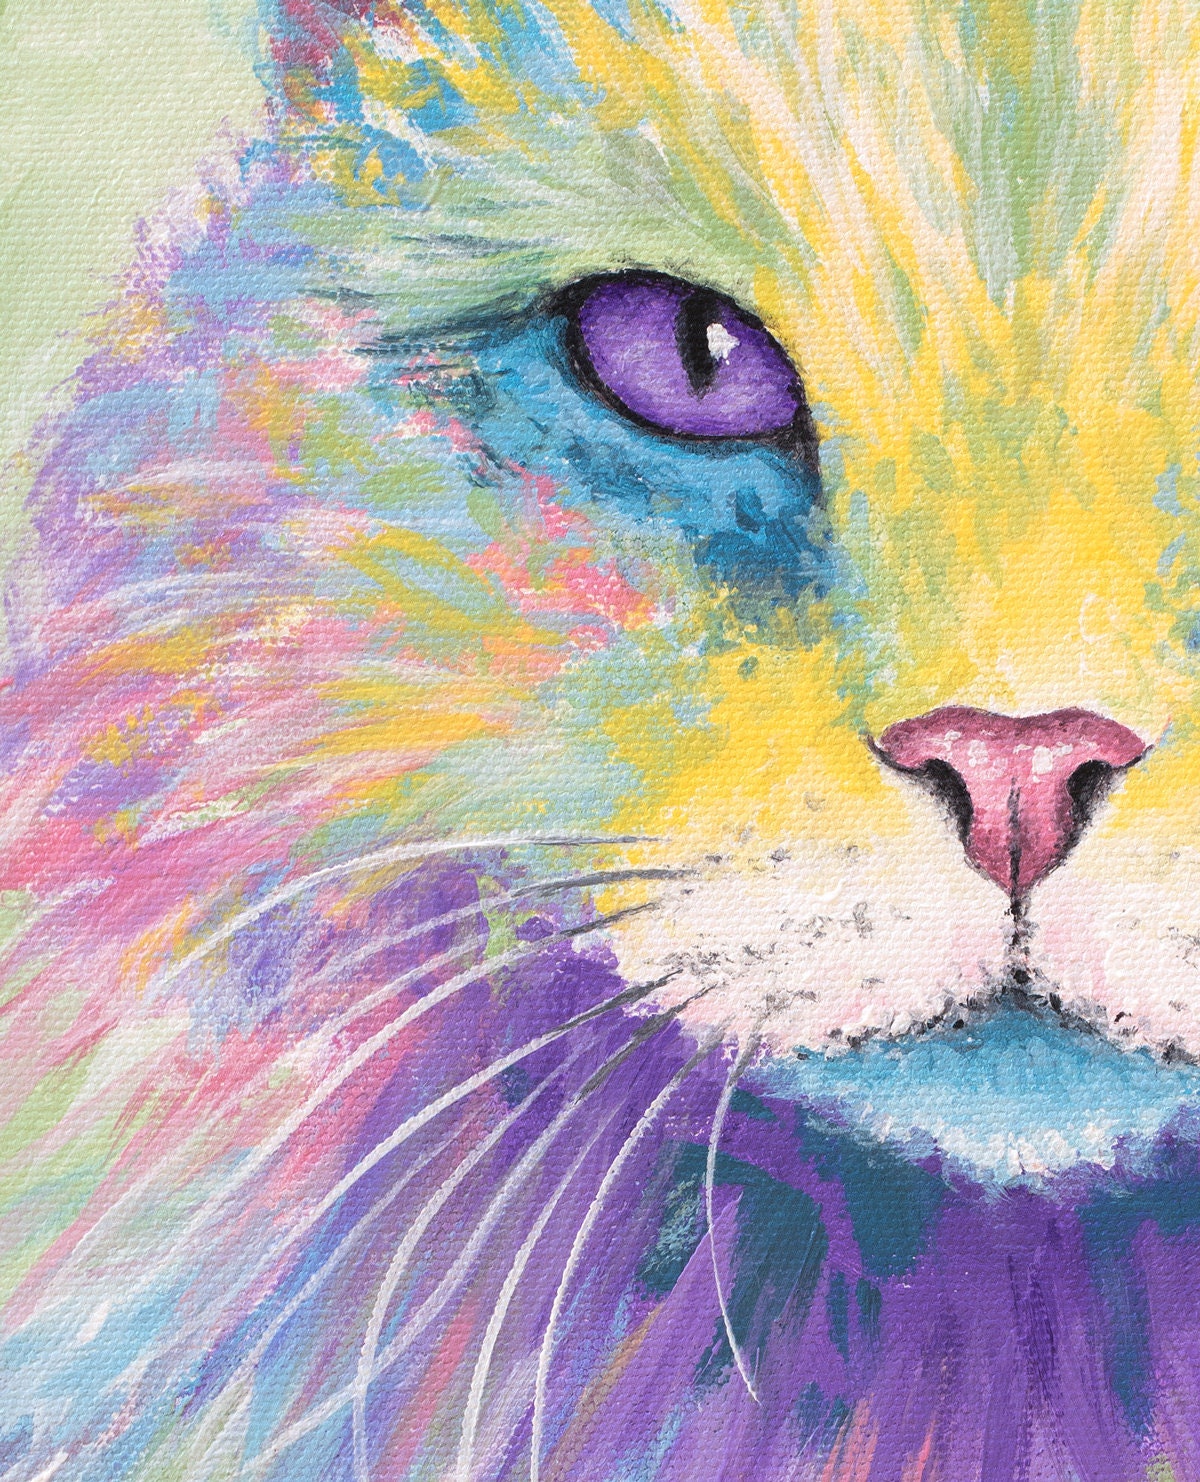 Long-Haired Cat Art - Cat Portrait. Nebelung Kitty Cat Print on CANVAS or PAPER by Krystle Cole